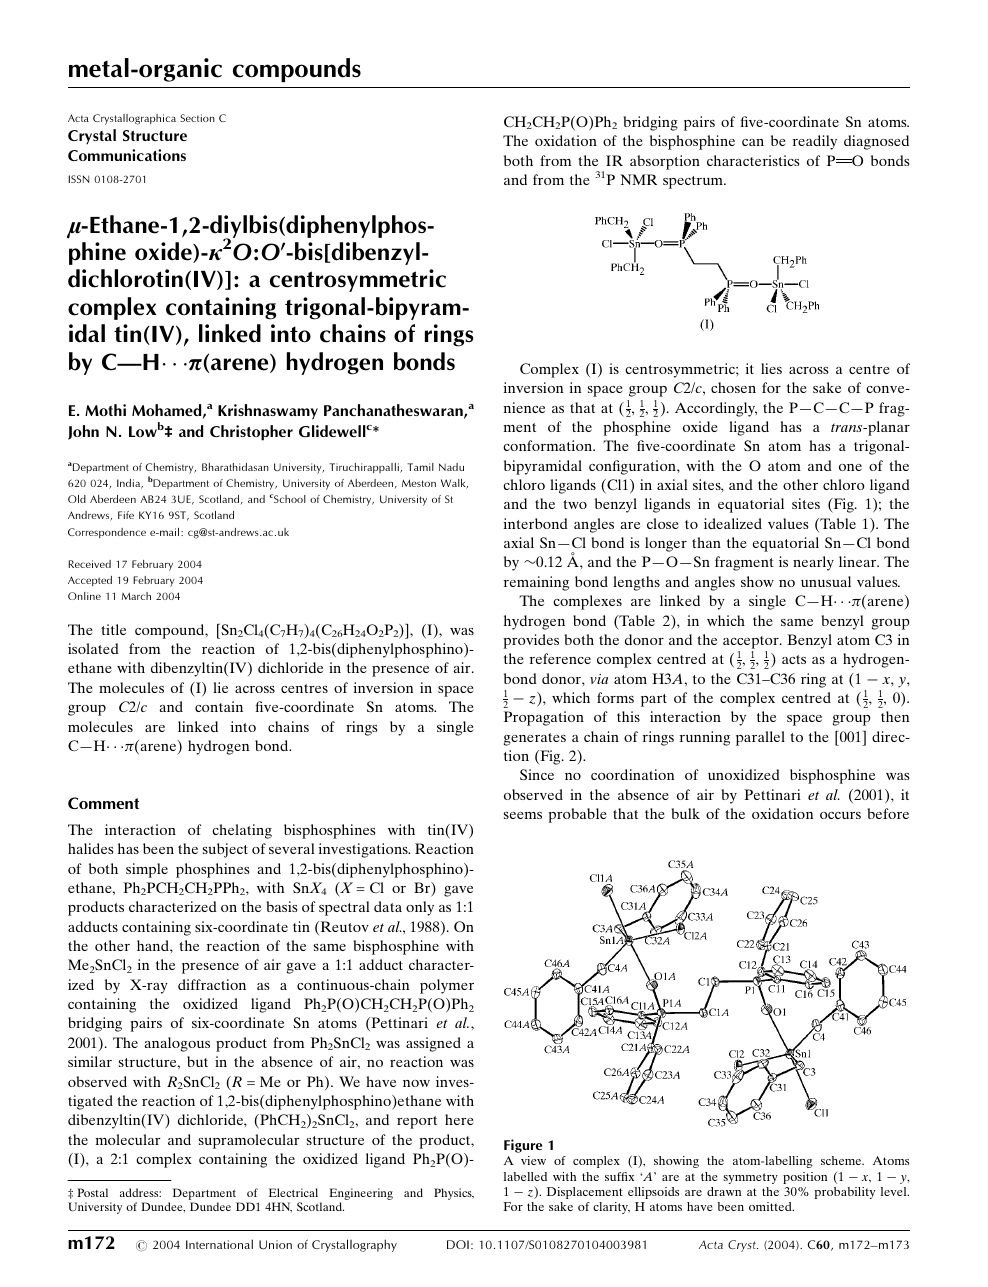 M Ethane 1 2 Diylbis Diphenylphosphine Oxide K 2 O O Bis Dibenzyldichlorotin Iv A Centrosymmetric Complex Containing Trigonal Bipyramidal Tin Iv Linked Into Chains Of Rings By C H P Arene Hydrogen Bonds Topic Of Research Paper In